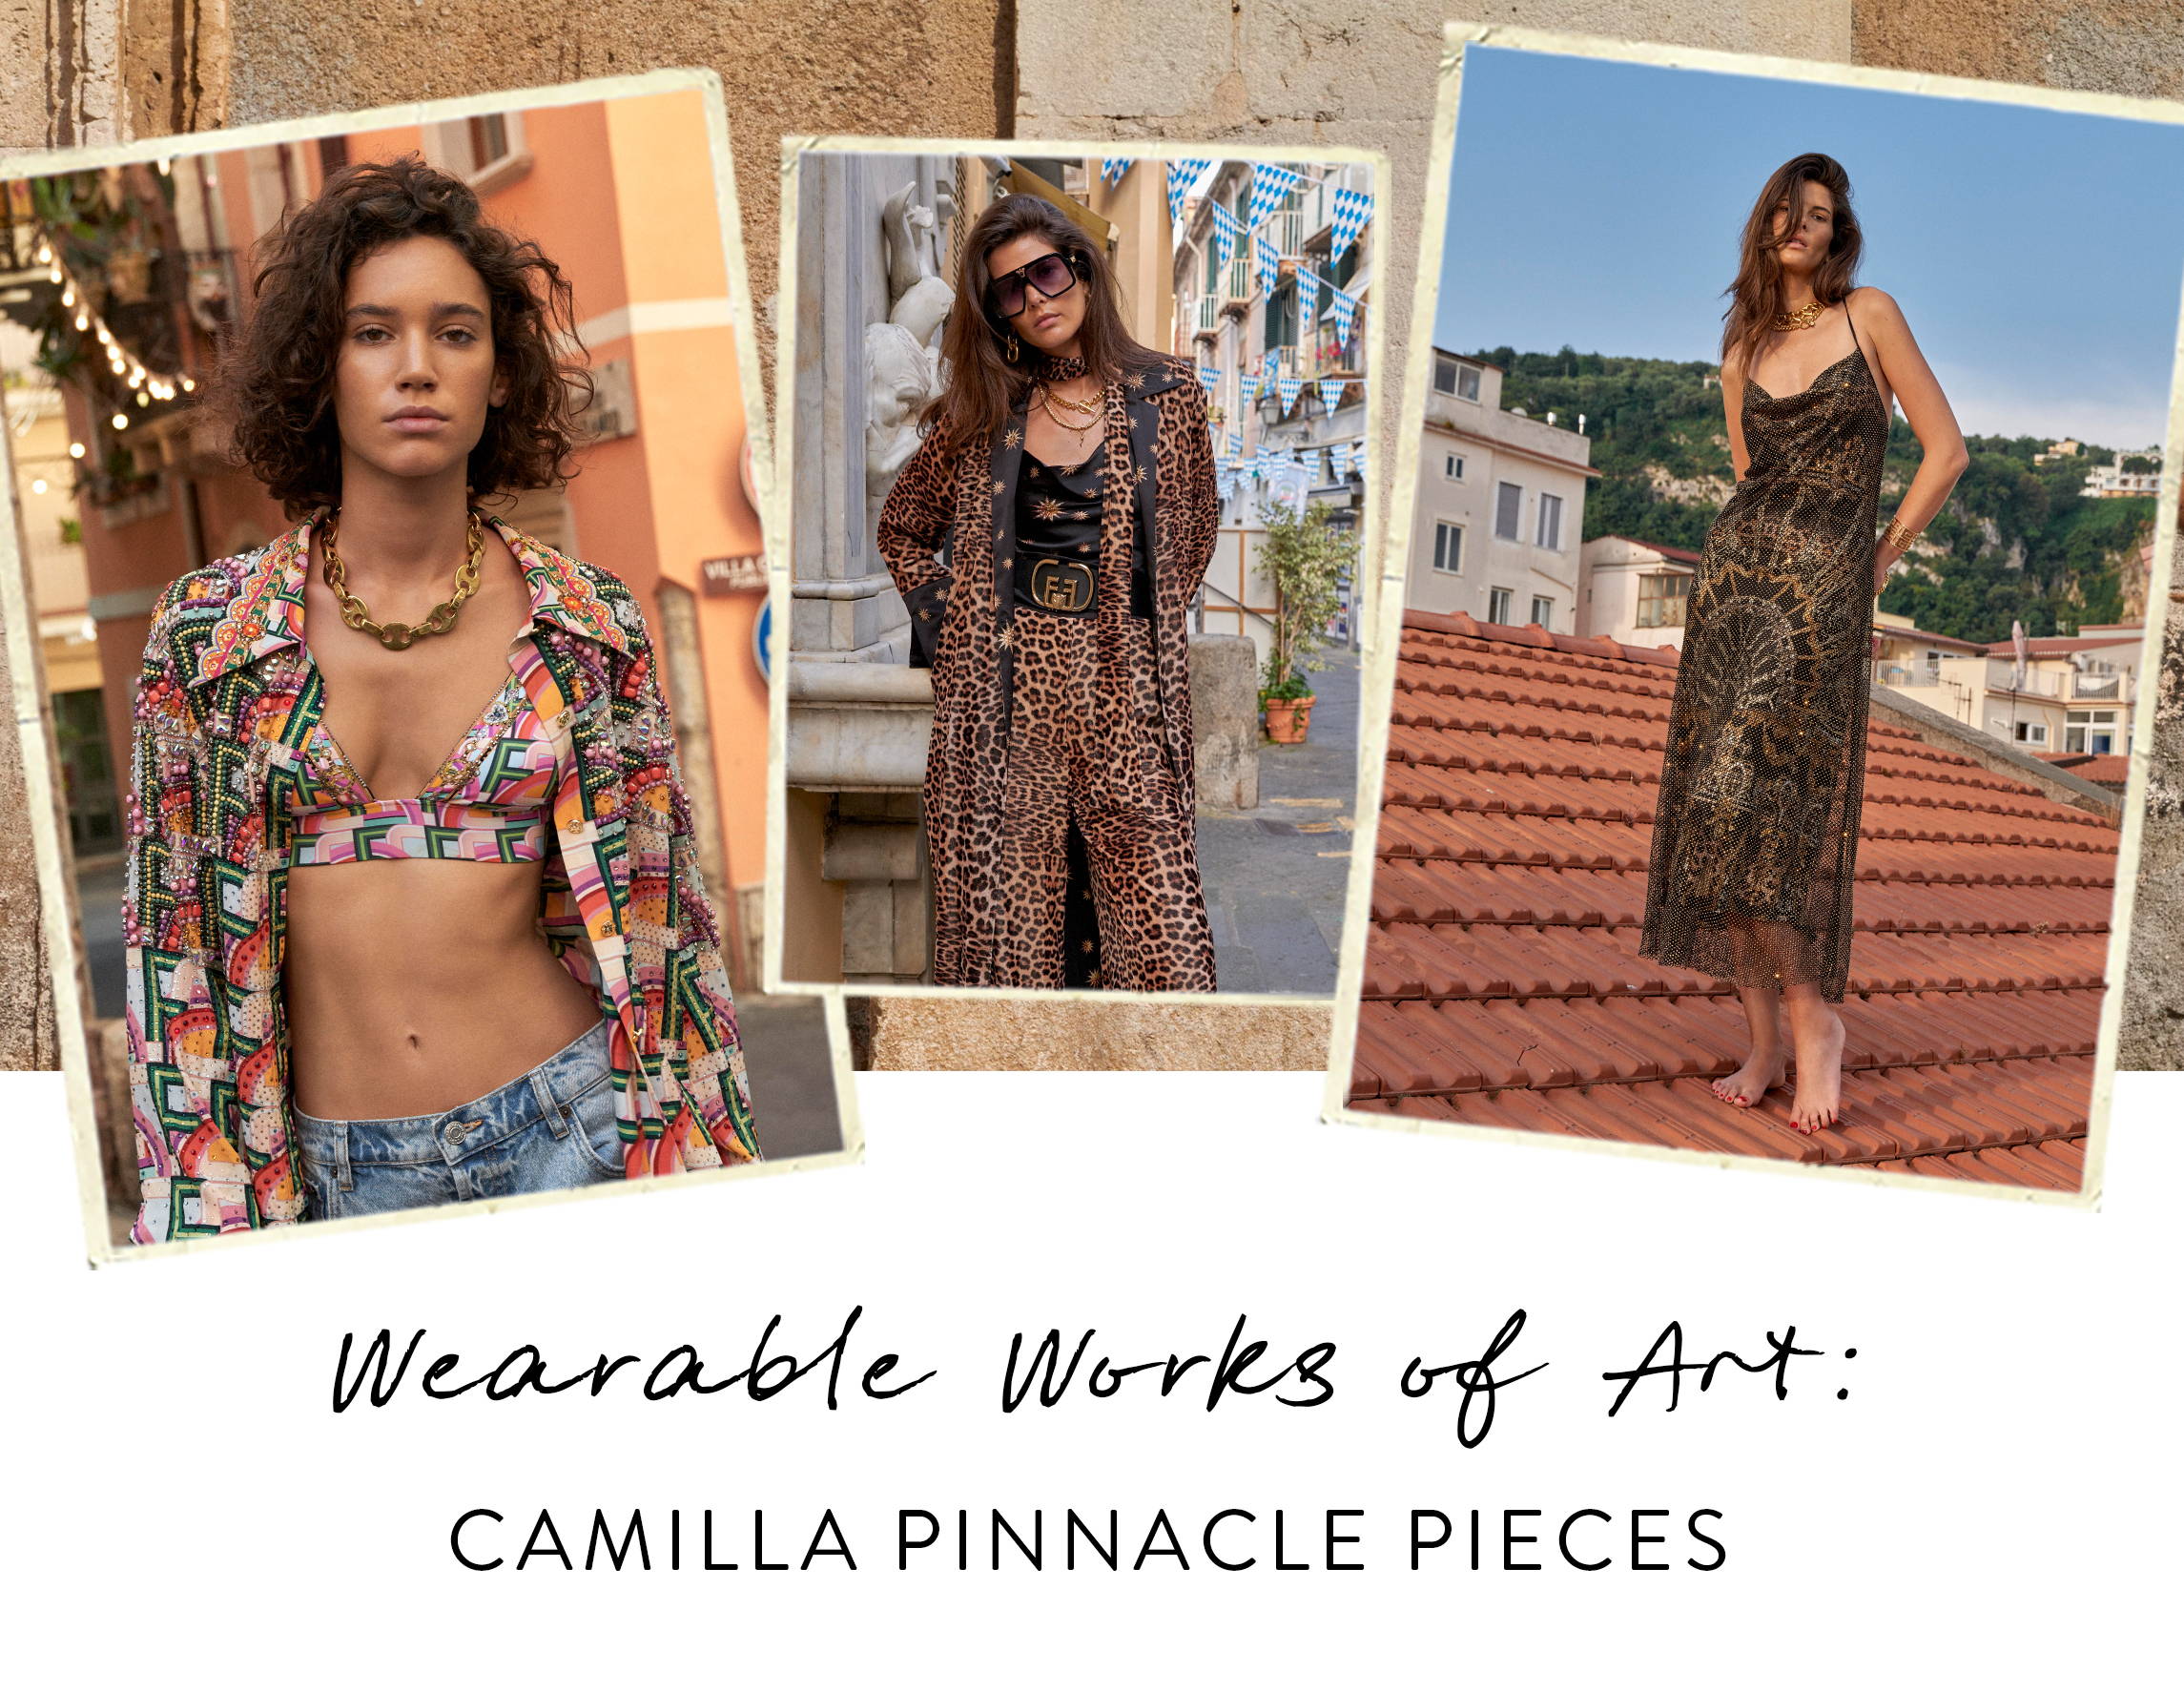 Wearable Works of Art: CAMILLA PINNACLE PIECES